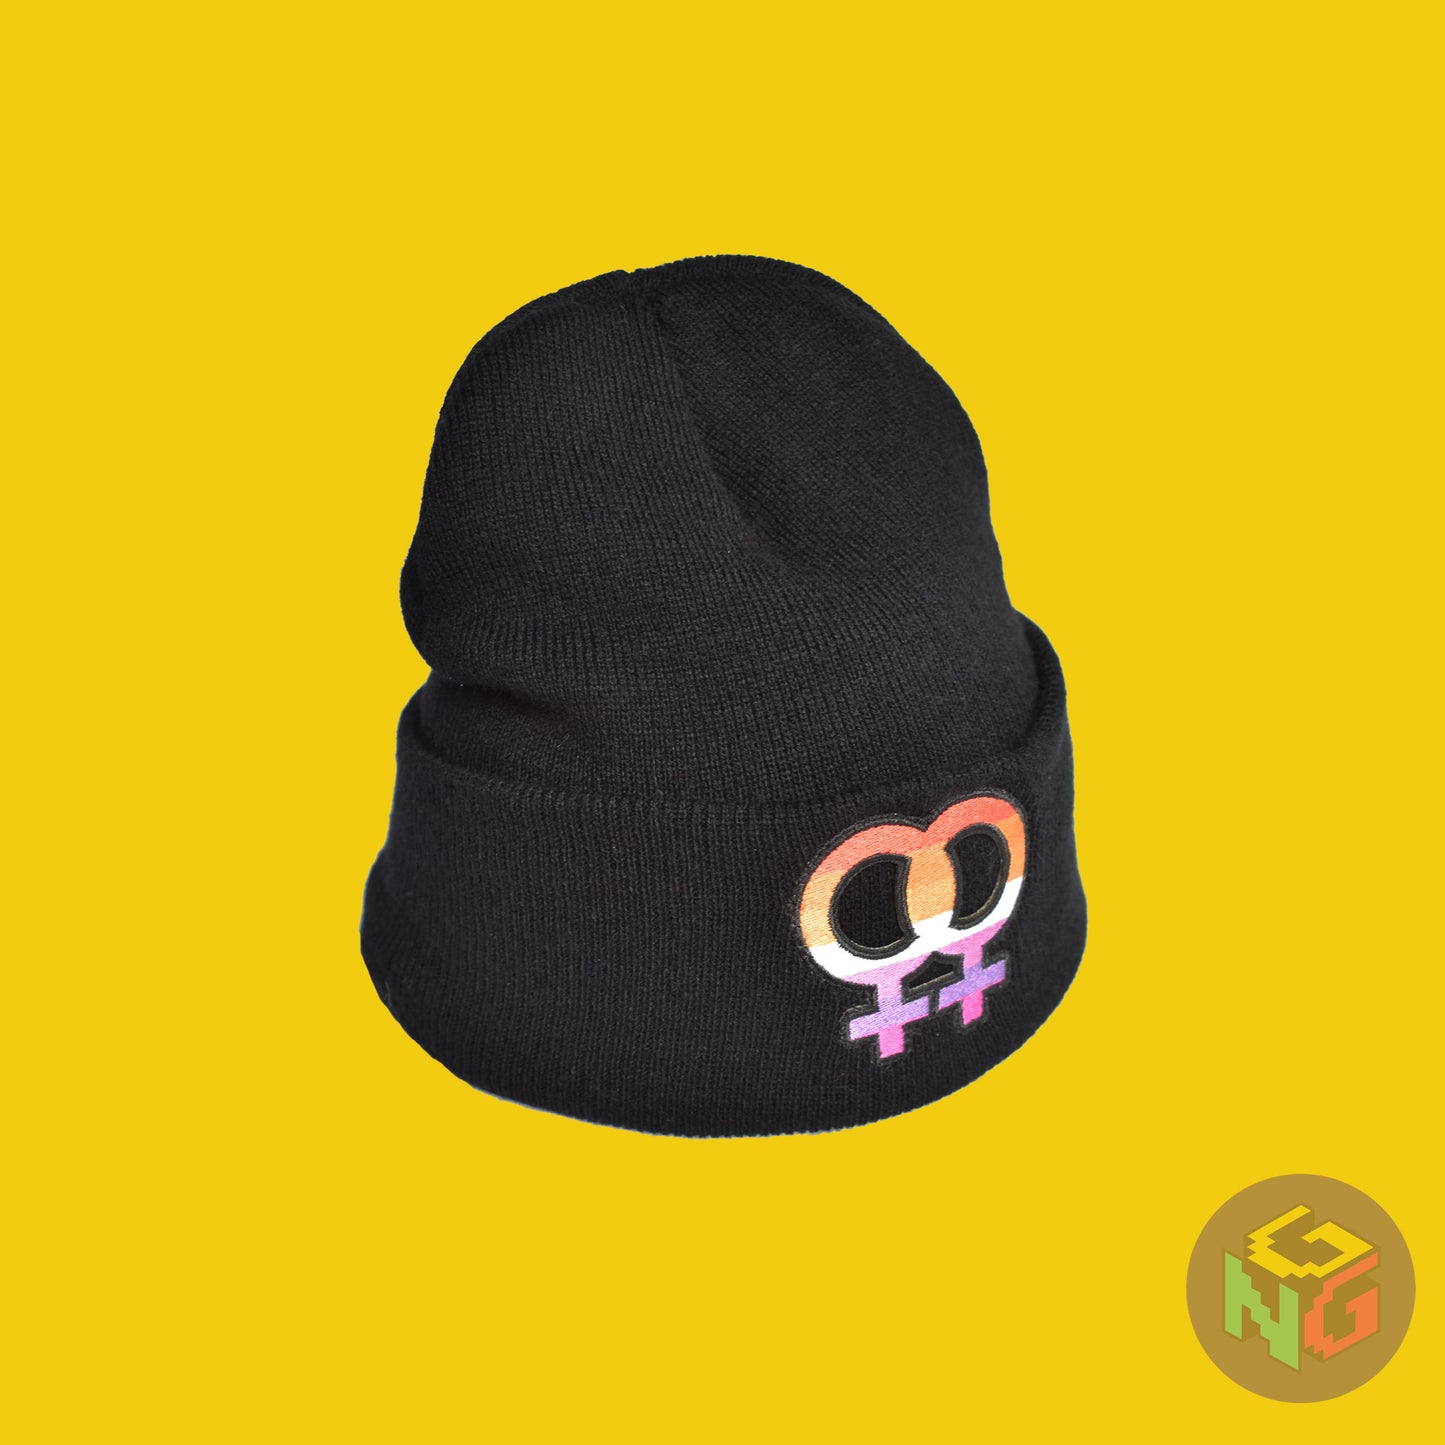 lesbian beanie stretched as if being worn in 3/4 view in front of yellow background